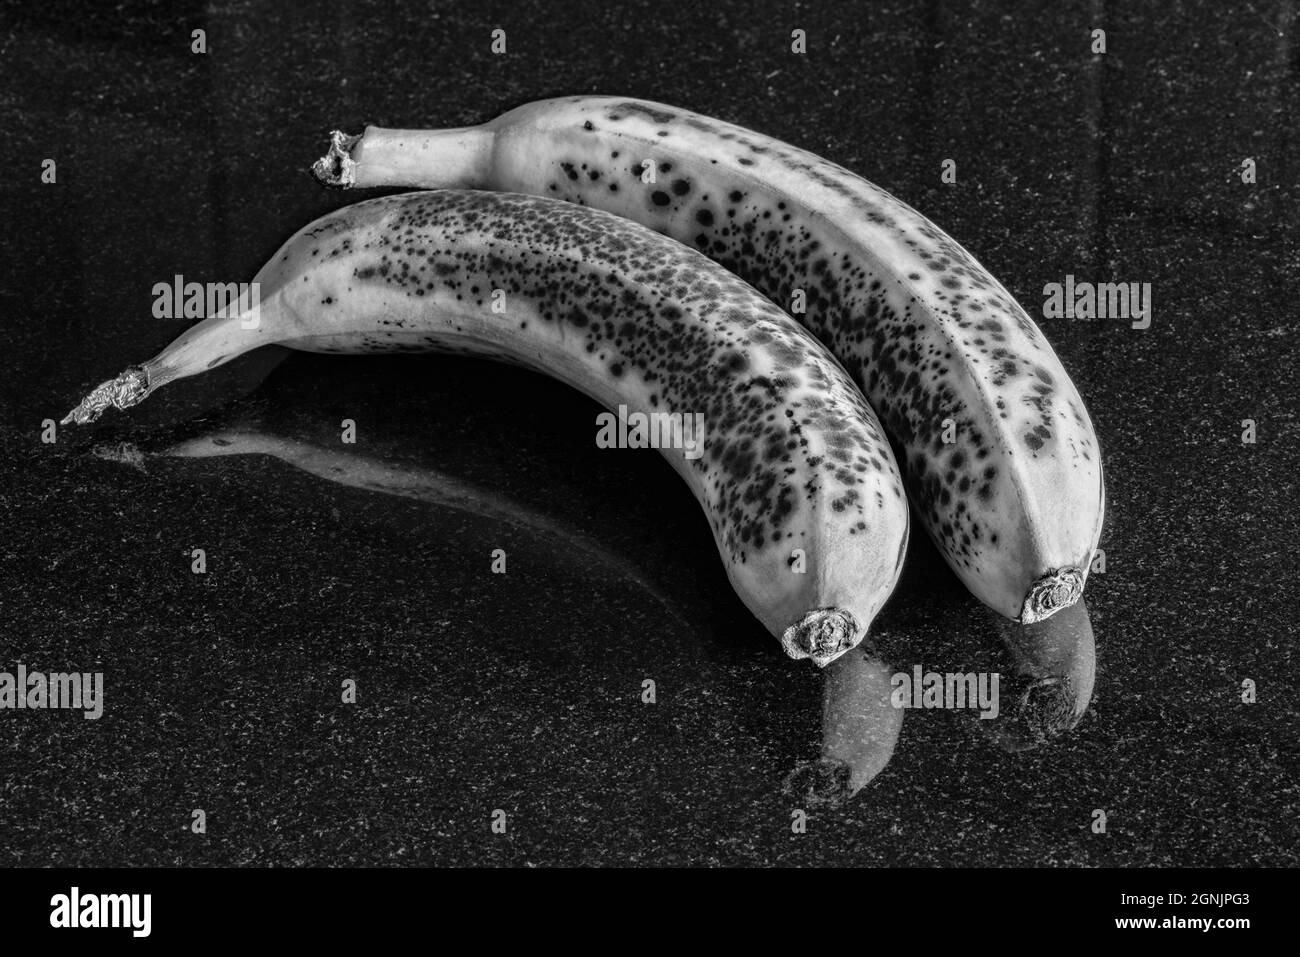 Over-ripe pair pf bananas with dark spotting on the skins Stock Photo